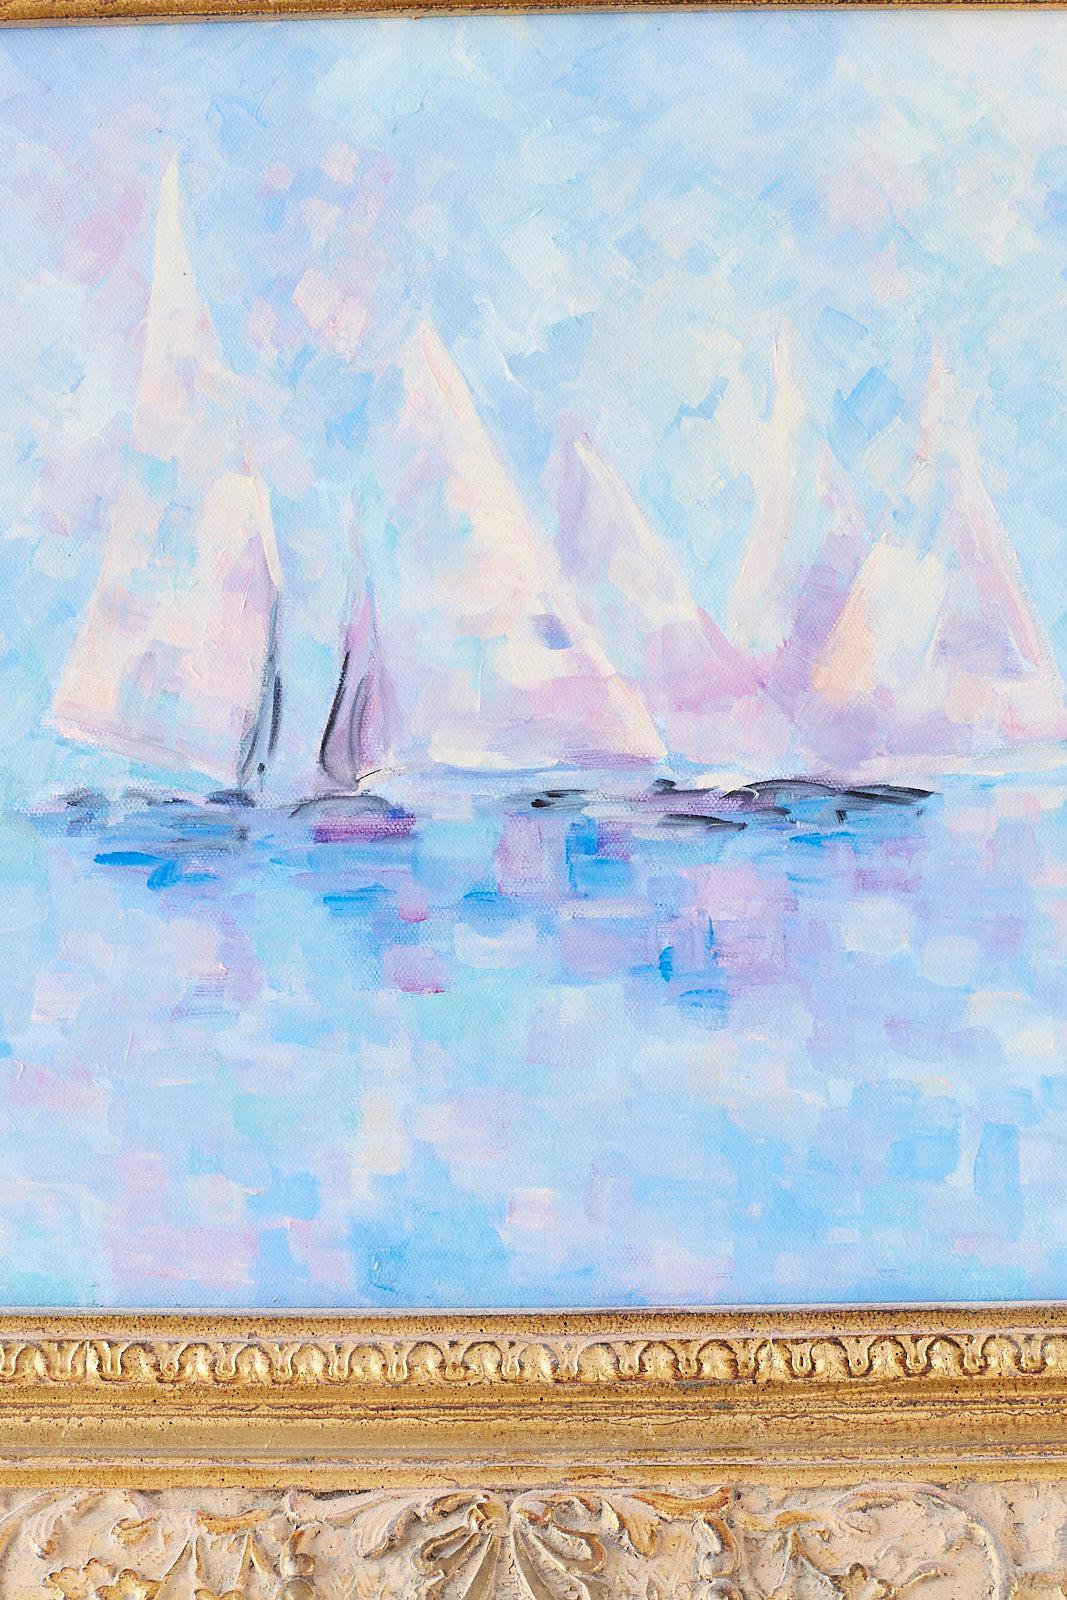 Expressionist Midcentury Oil on Canvas Painting of Sailboats